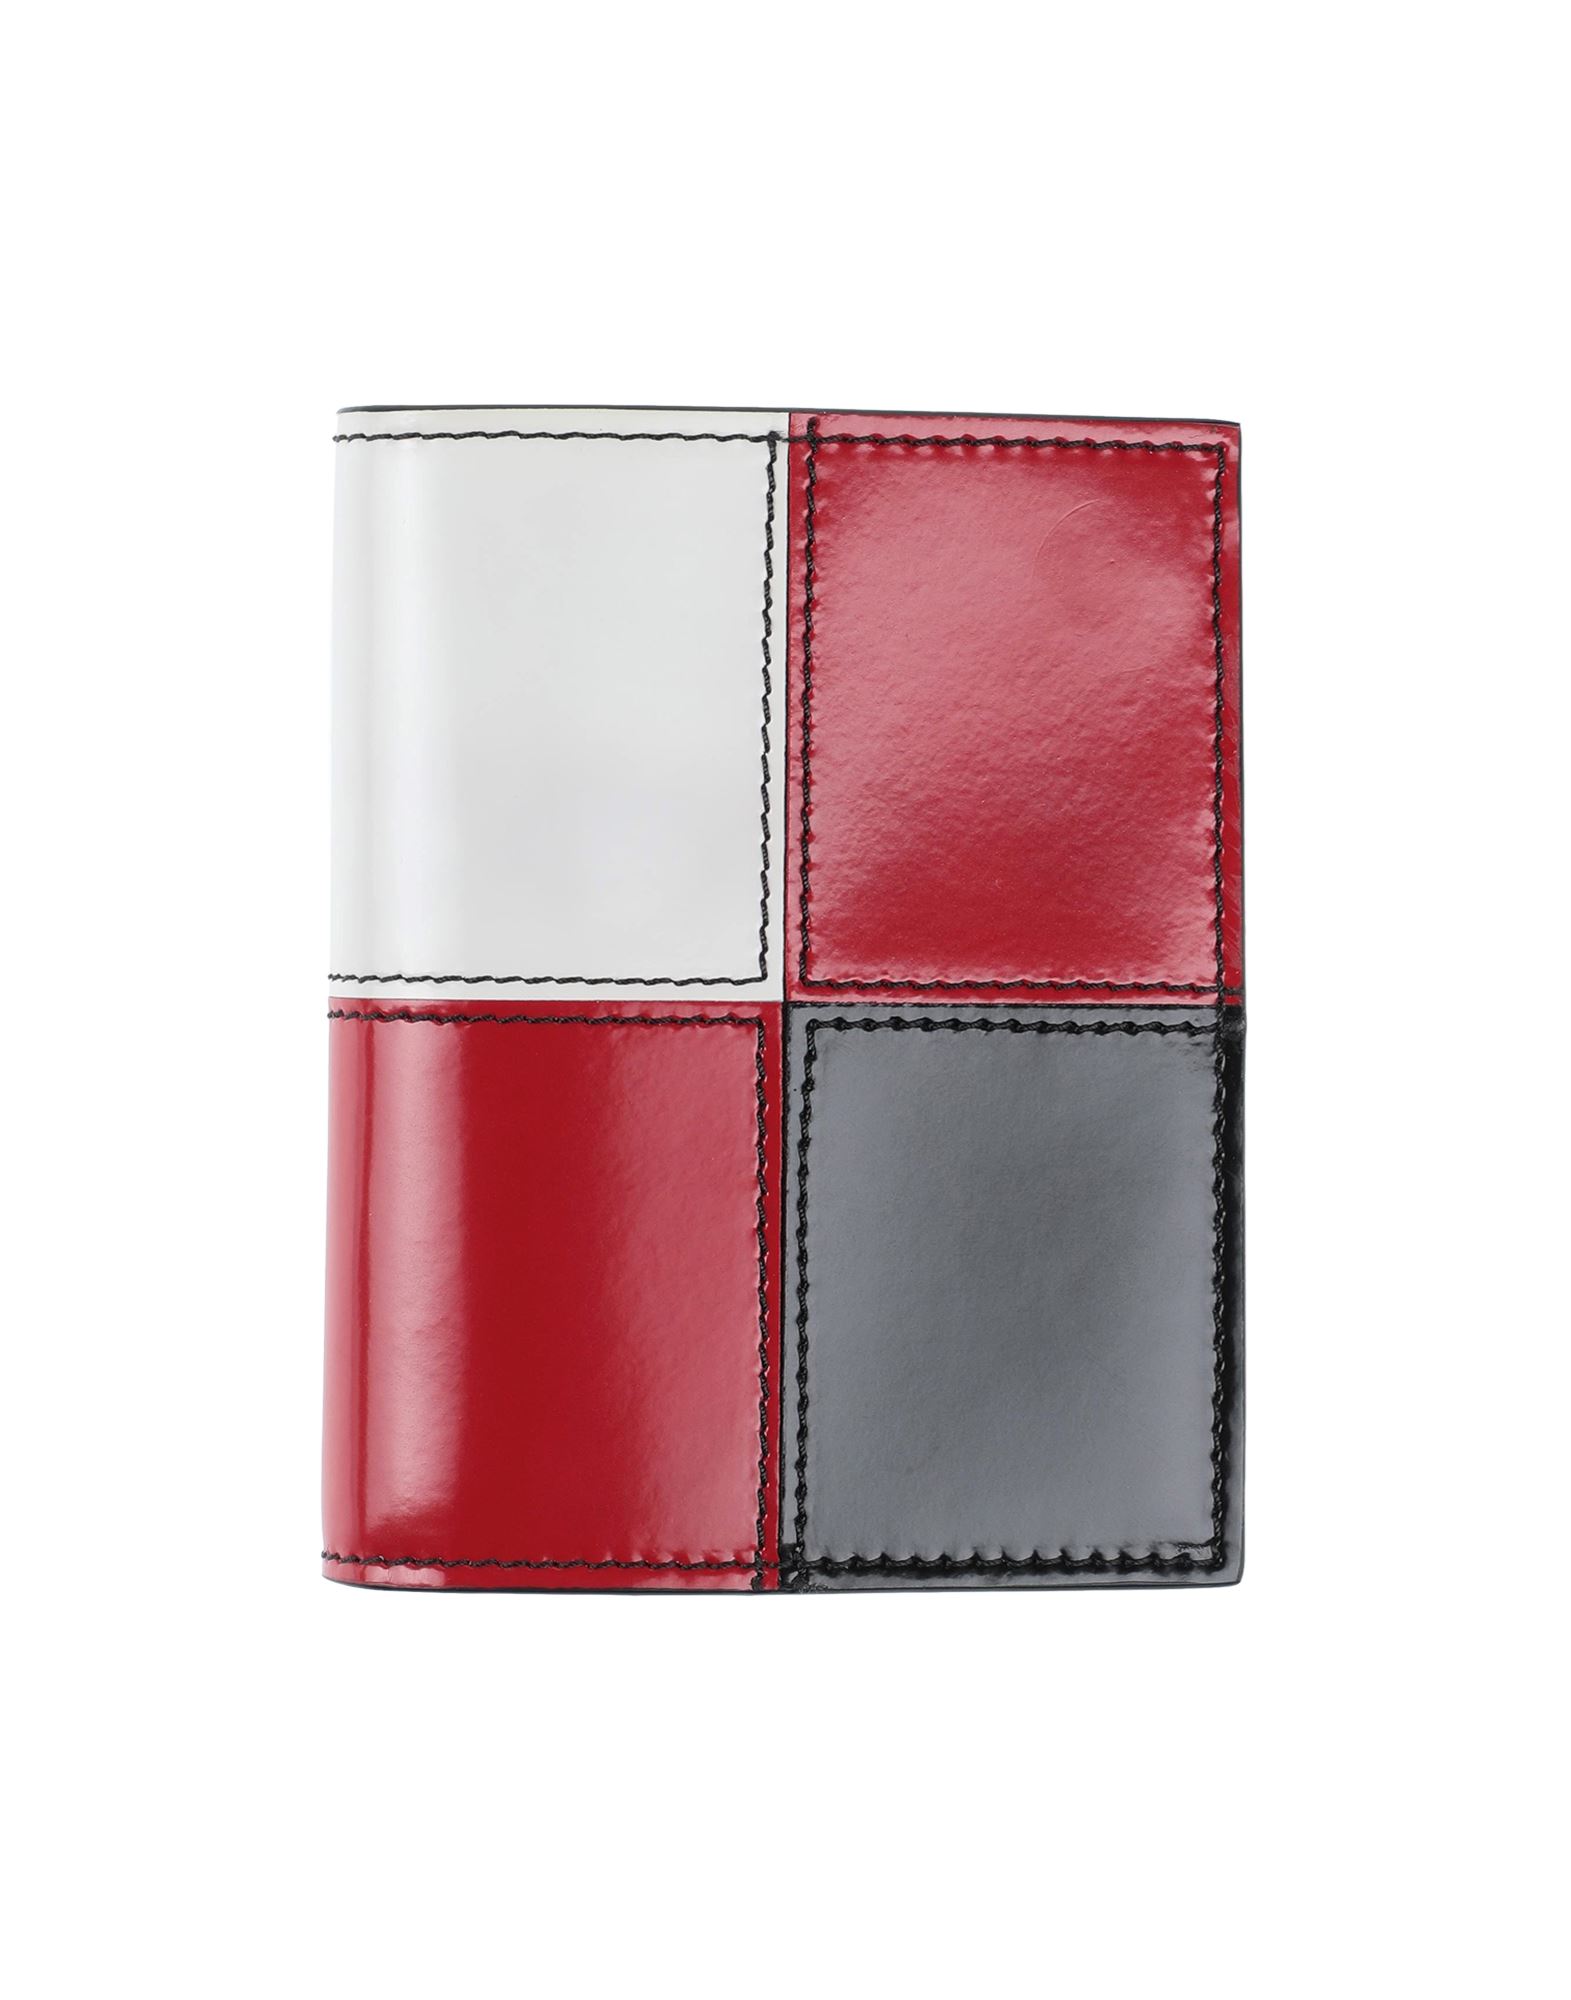 Women's MARNI Wallets On Sale, Up To 70% Off | ModeSens